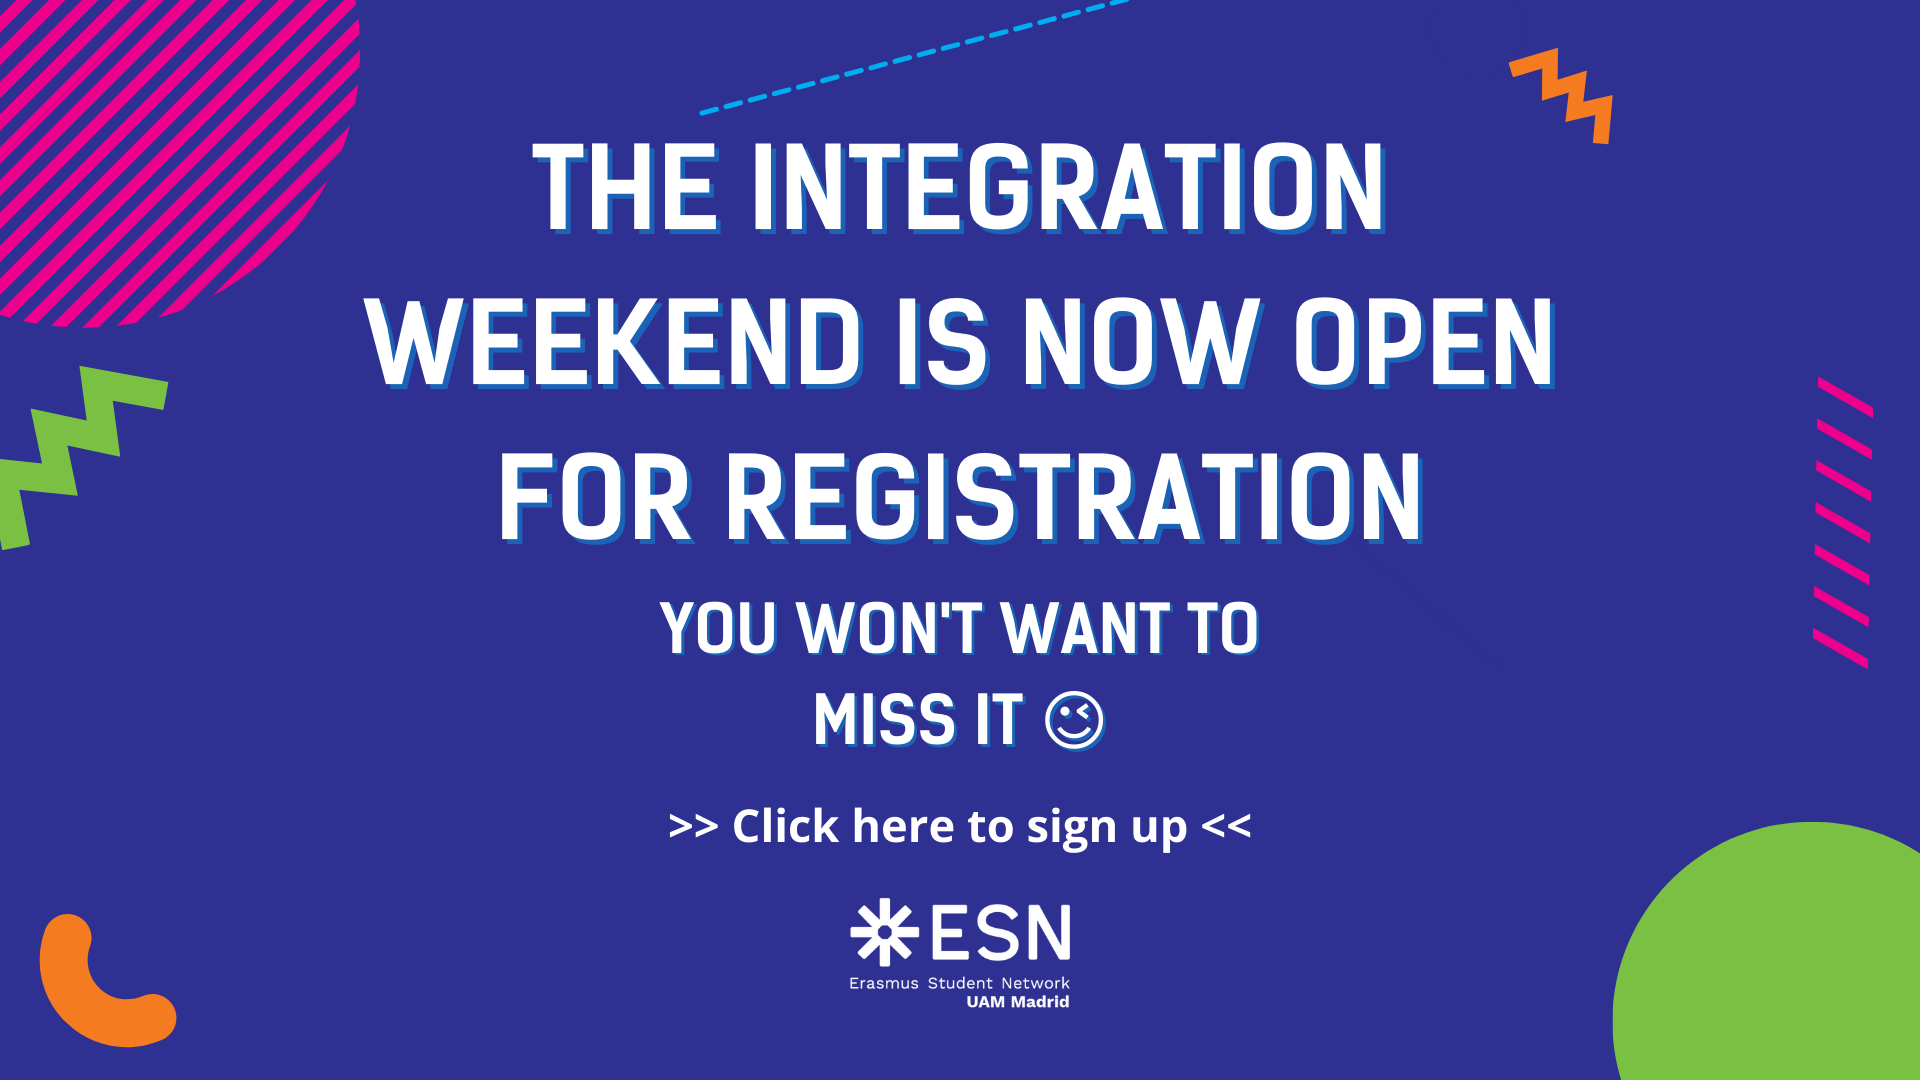 THE INTEGRATION WEEKEND IS OPEN FOR REGISTRATIONS. Click here to sign up.